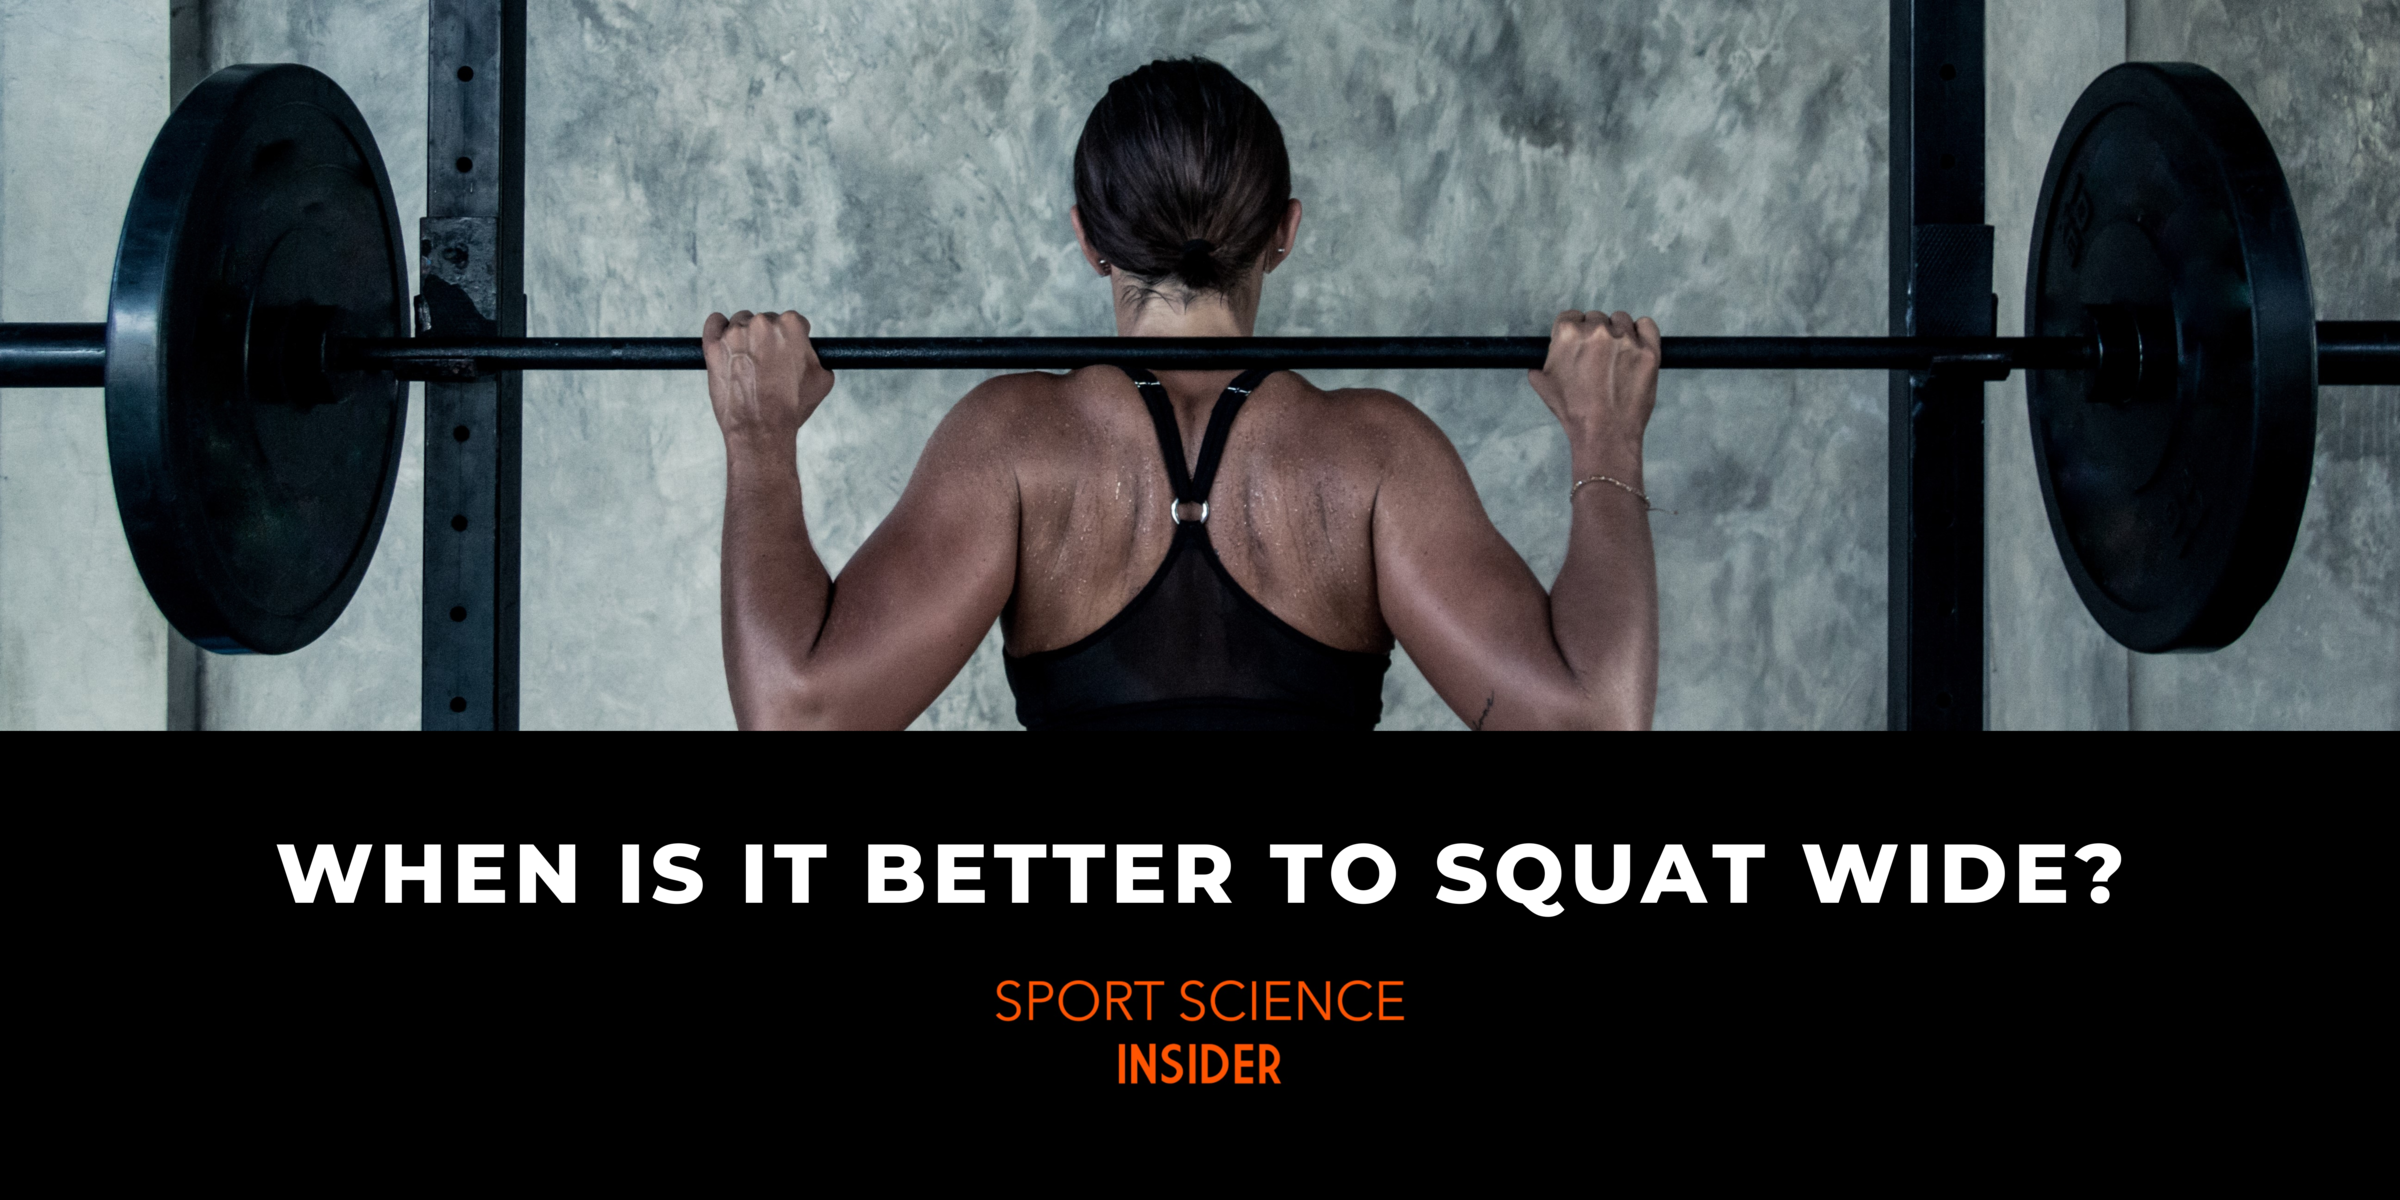 When is it better to squat wide?